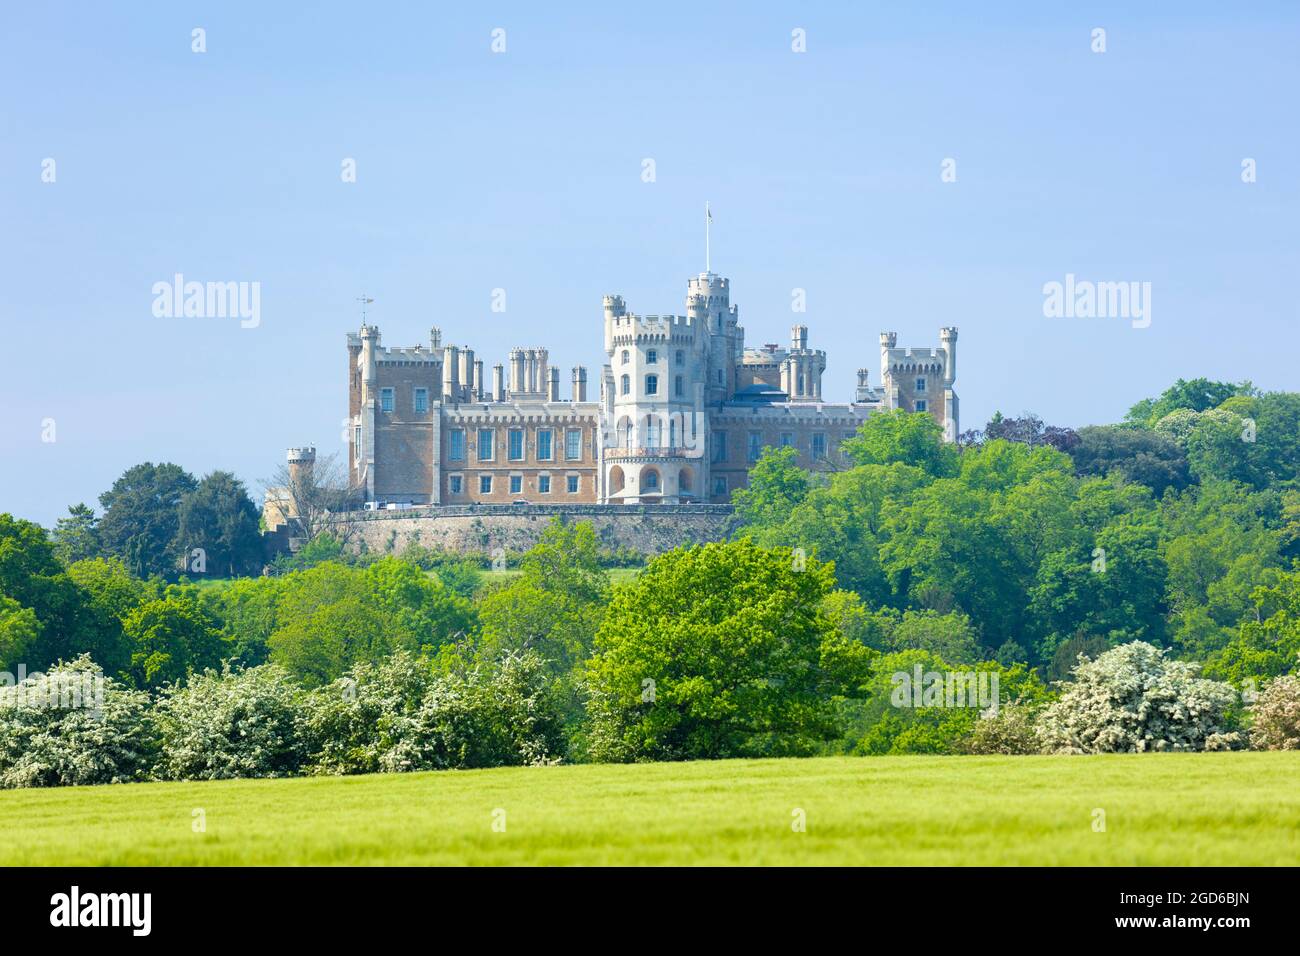 View of Belvoir Castle from across the fields of the Vale of Belvoir Grantham Leicestershire England UK GB Europe Stock Photo